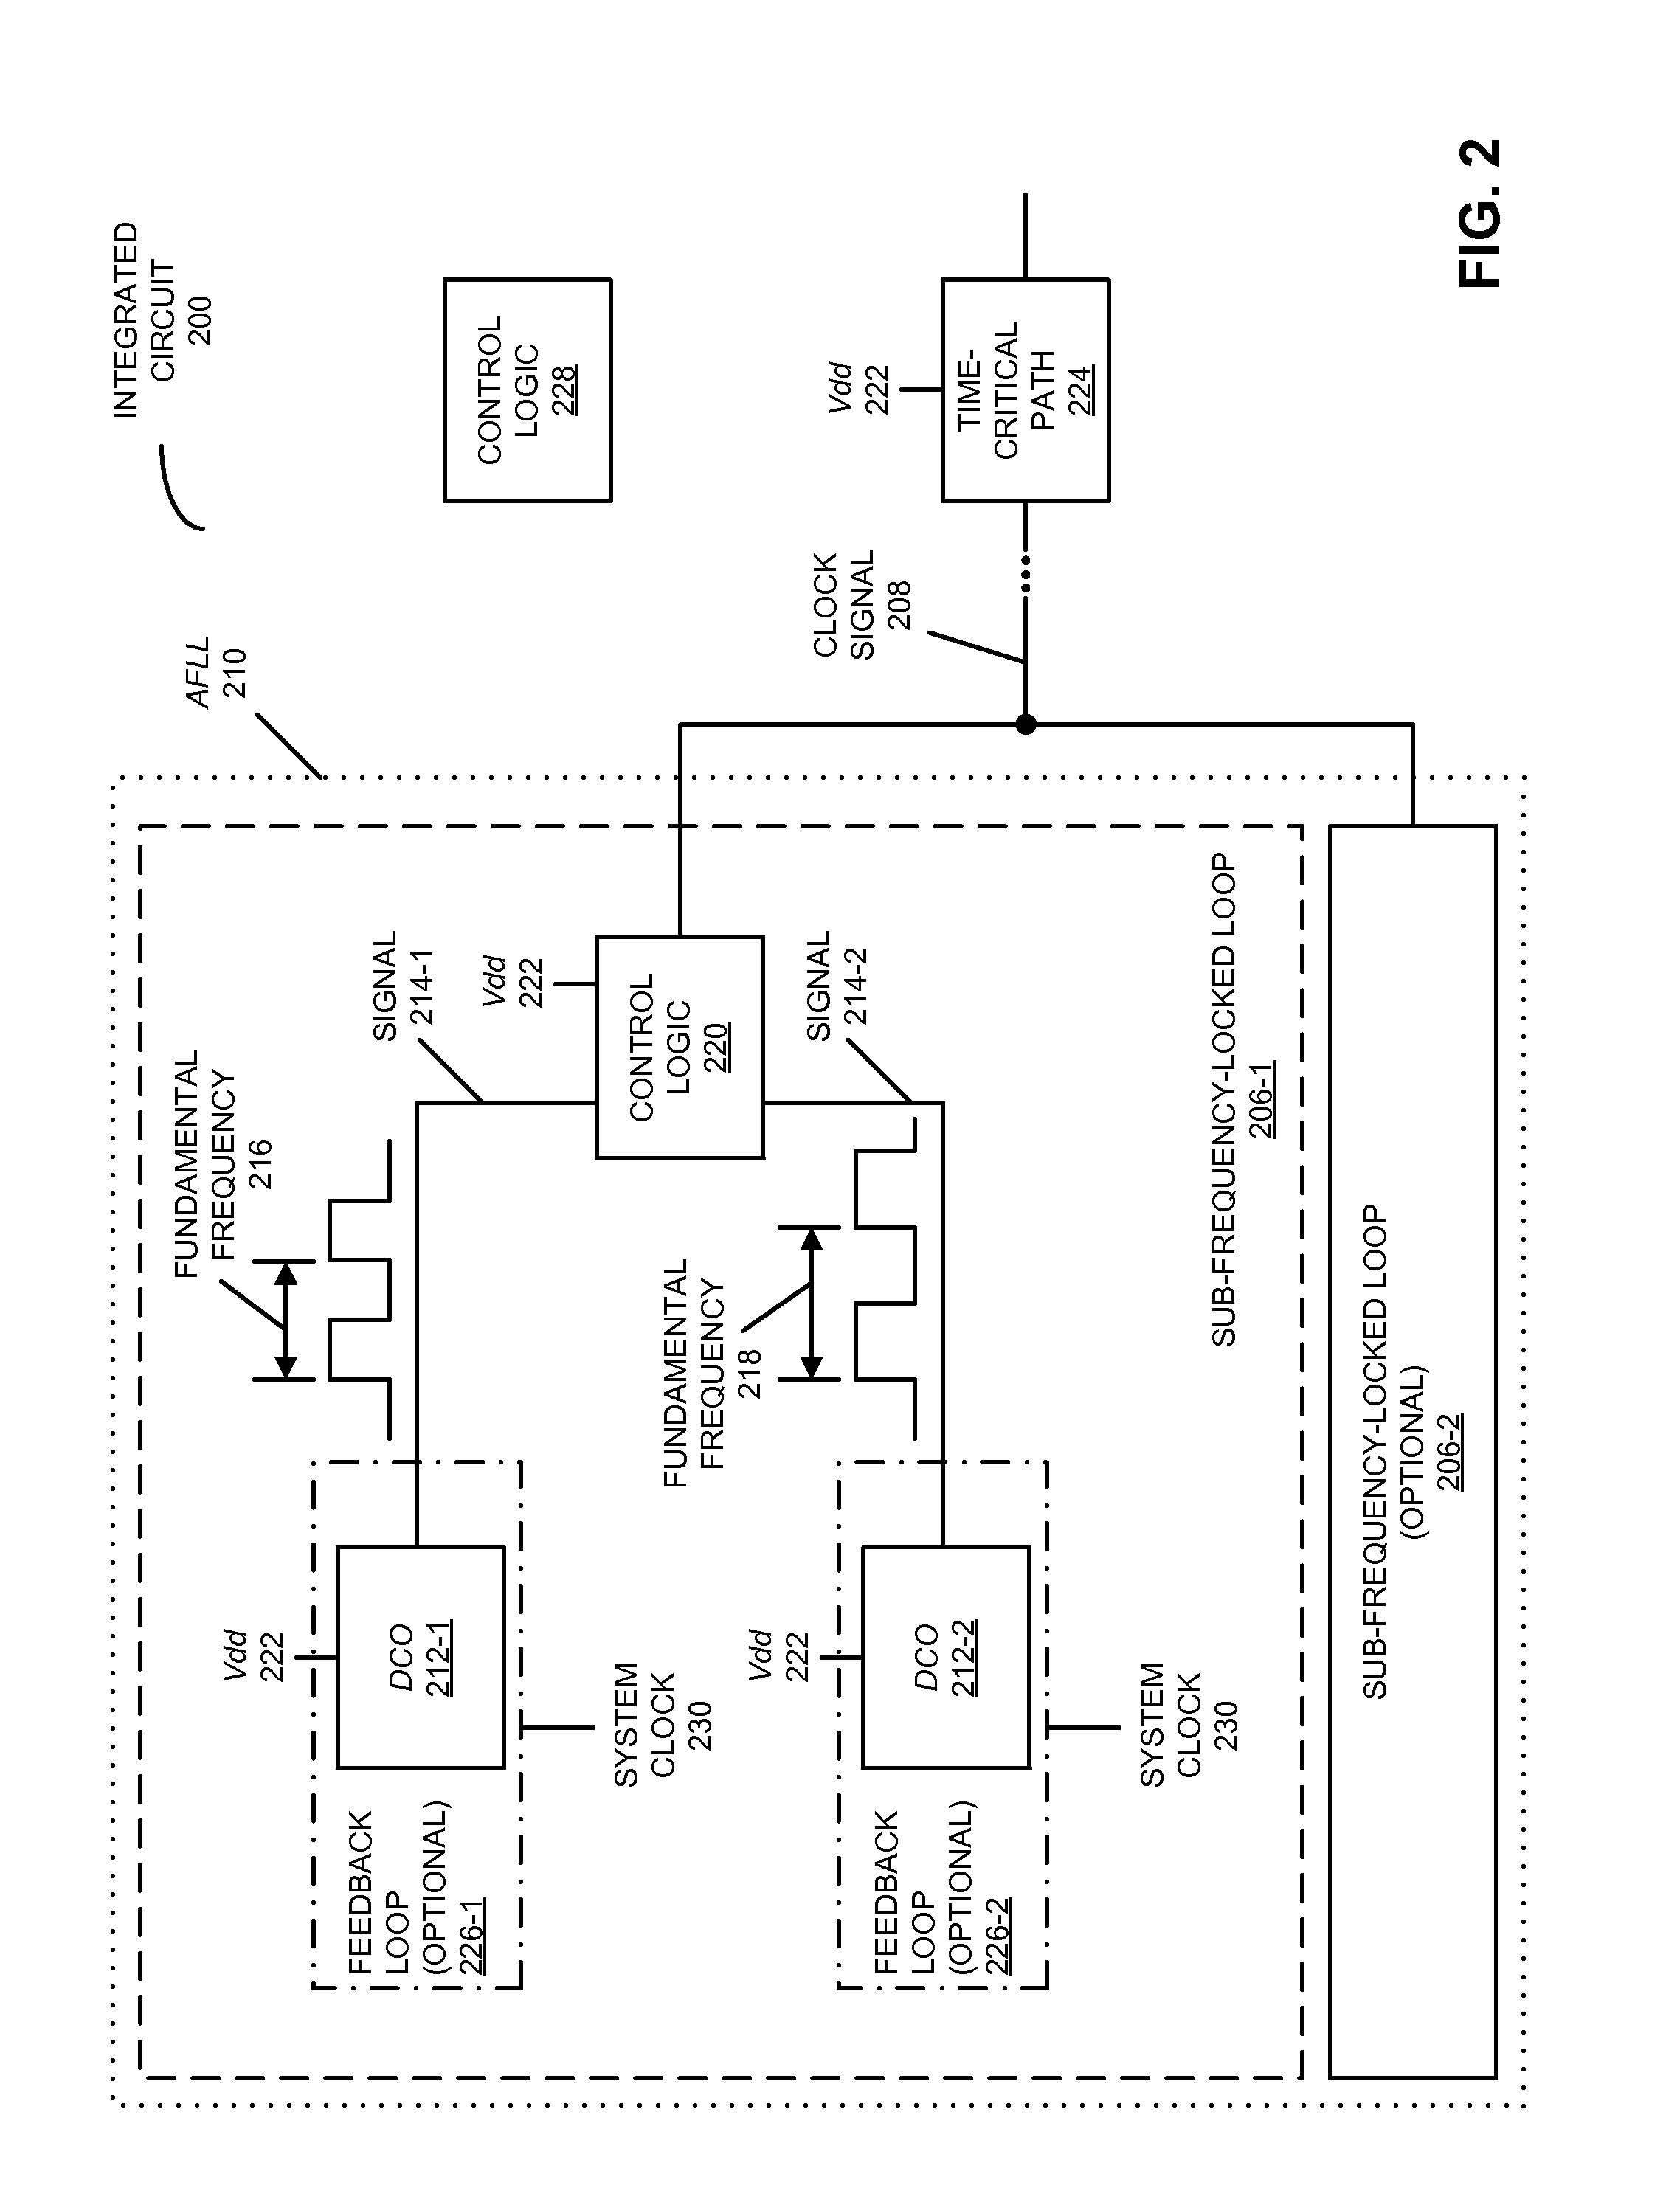 Noise suppression using an asymmetric frequency-locked loop